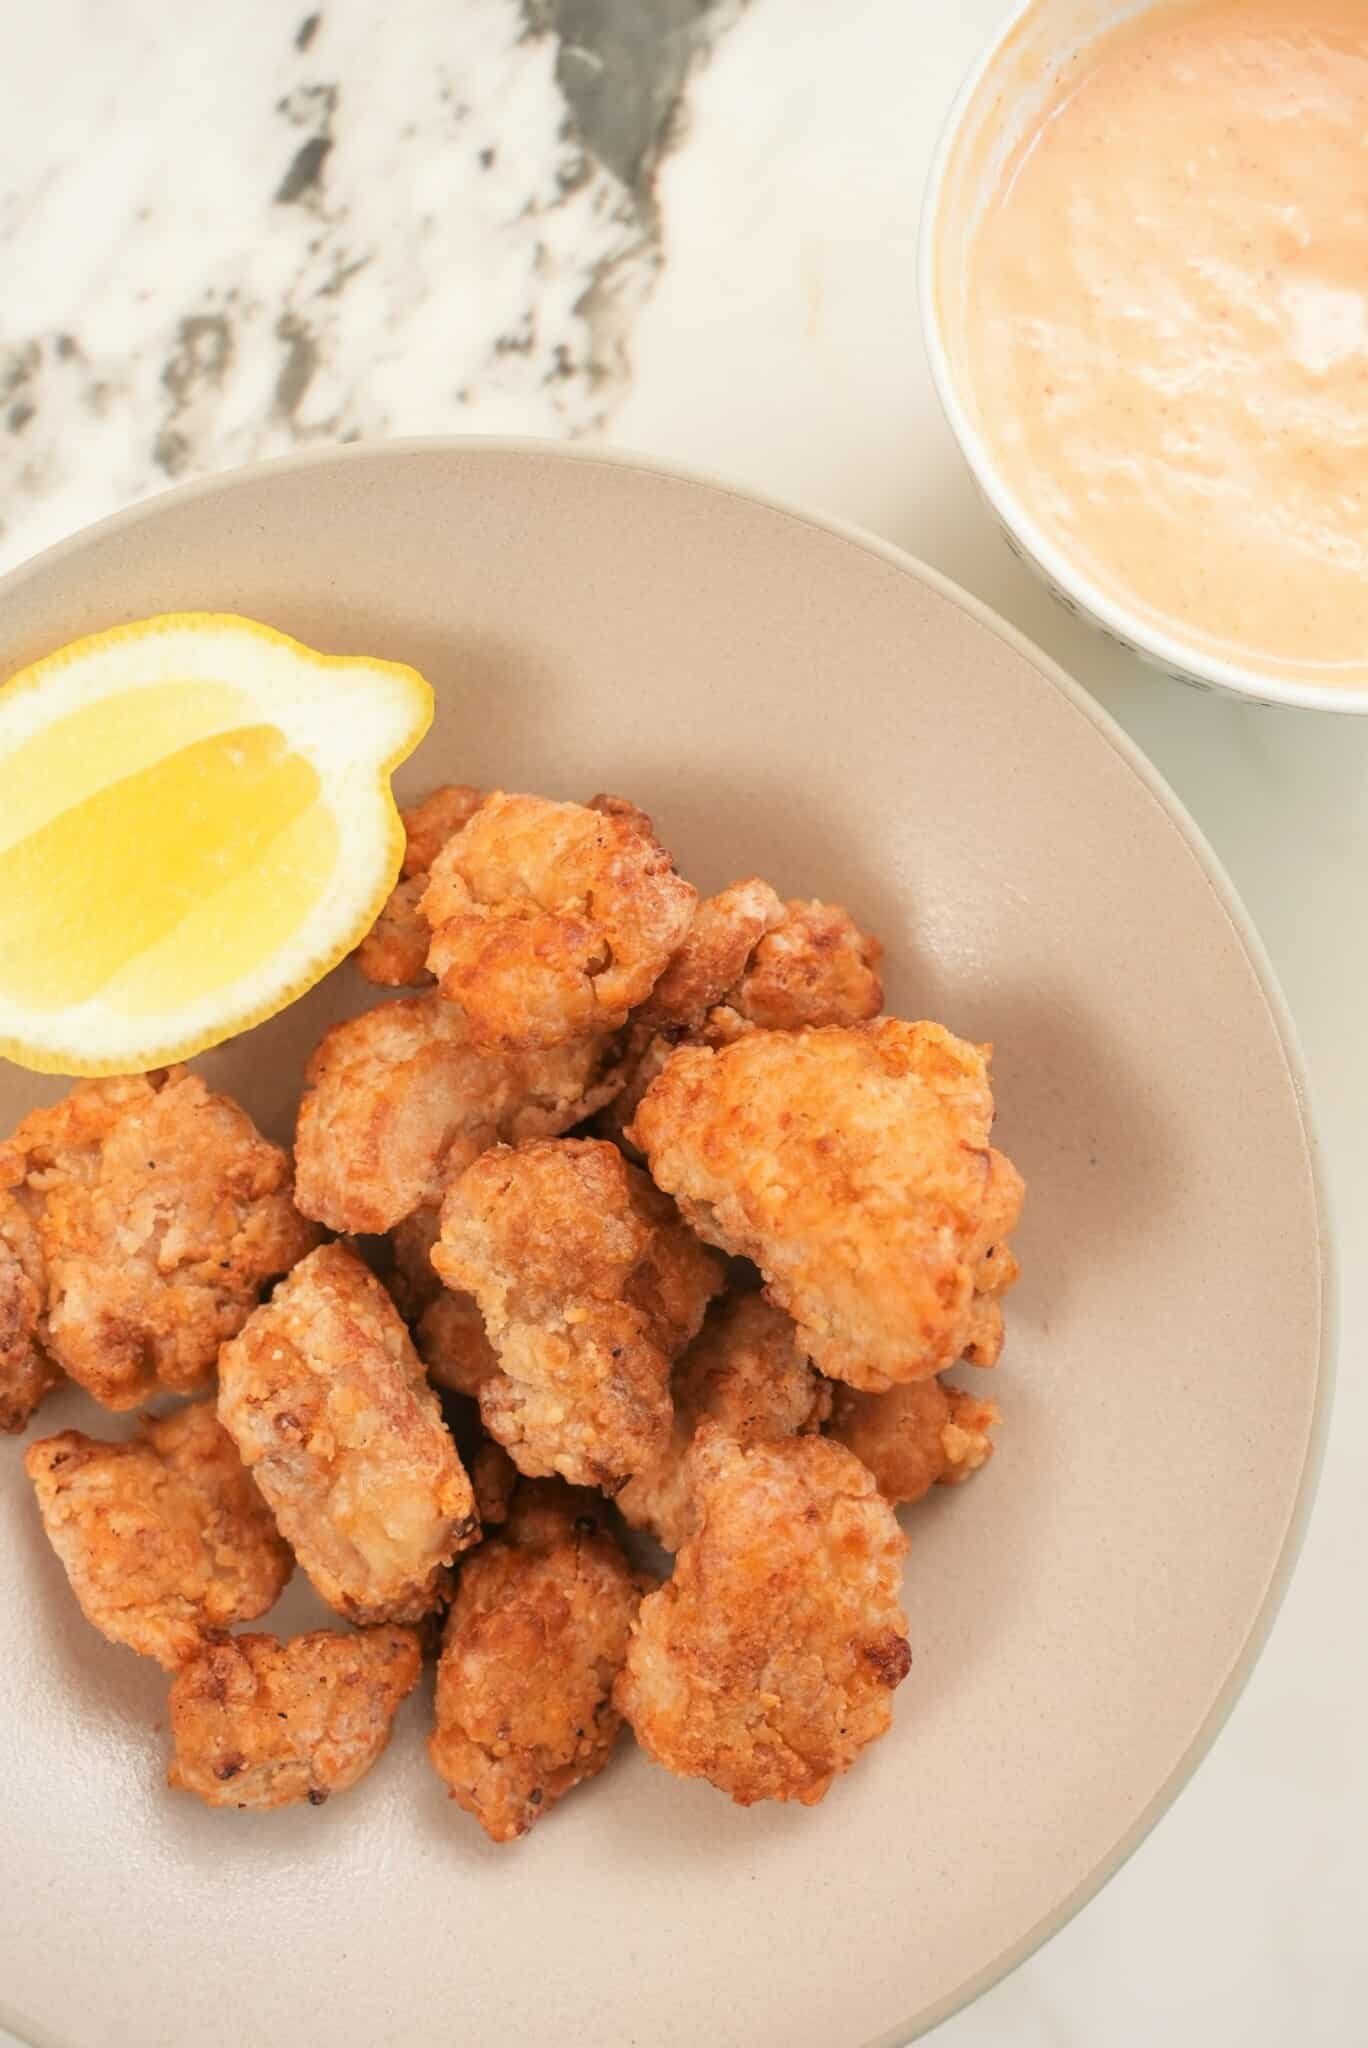 https://cjeatsrecipes.com/wp-content/uploads/2022/07/Air-Fryer-Chicken-Karaage-Japanese-Fried-Chicken-Plated-With-Sauce-scaled.jpg